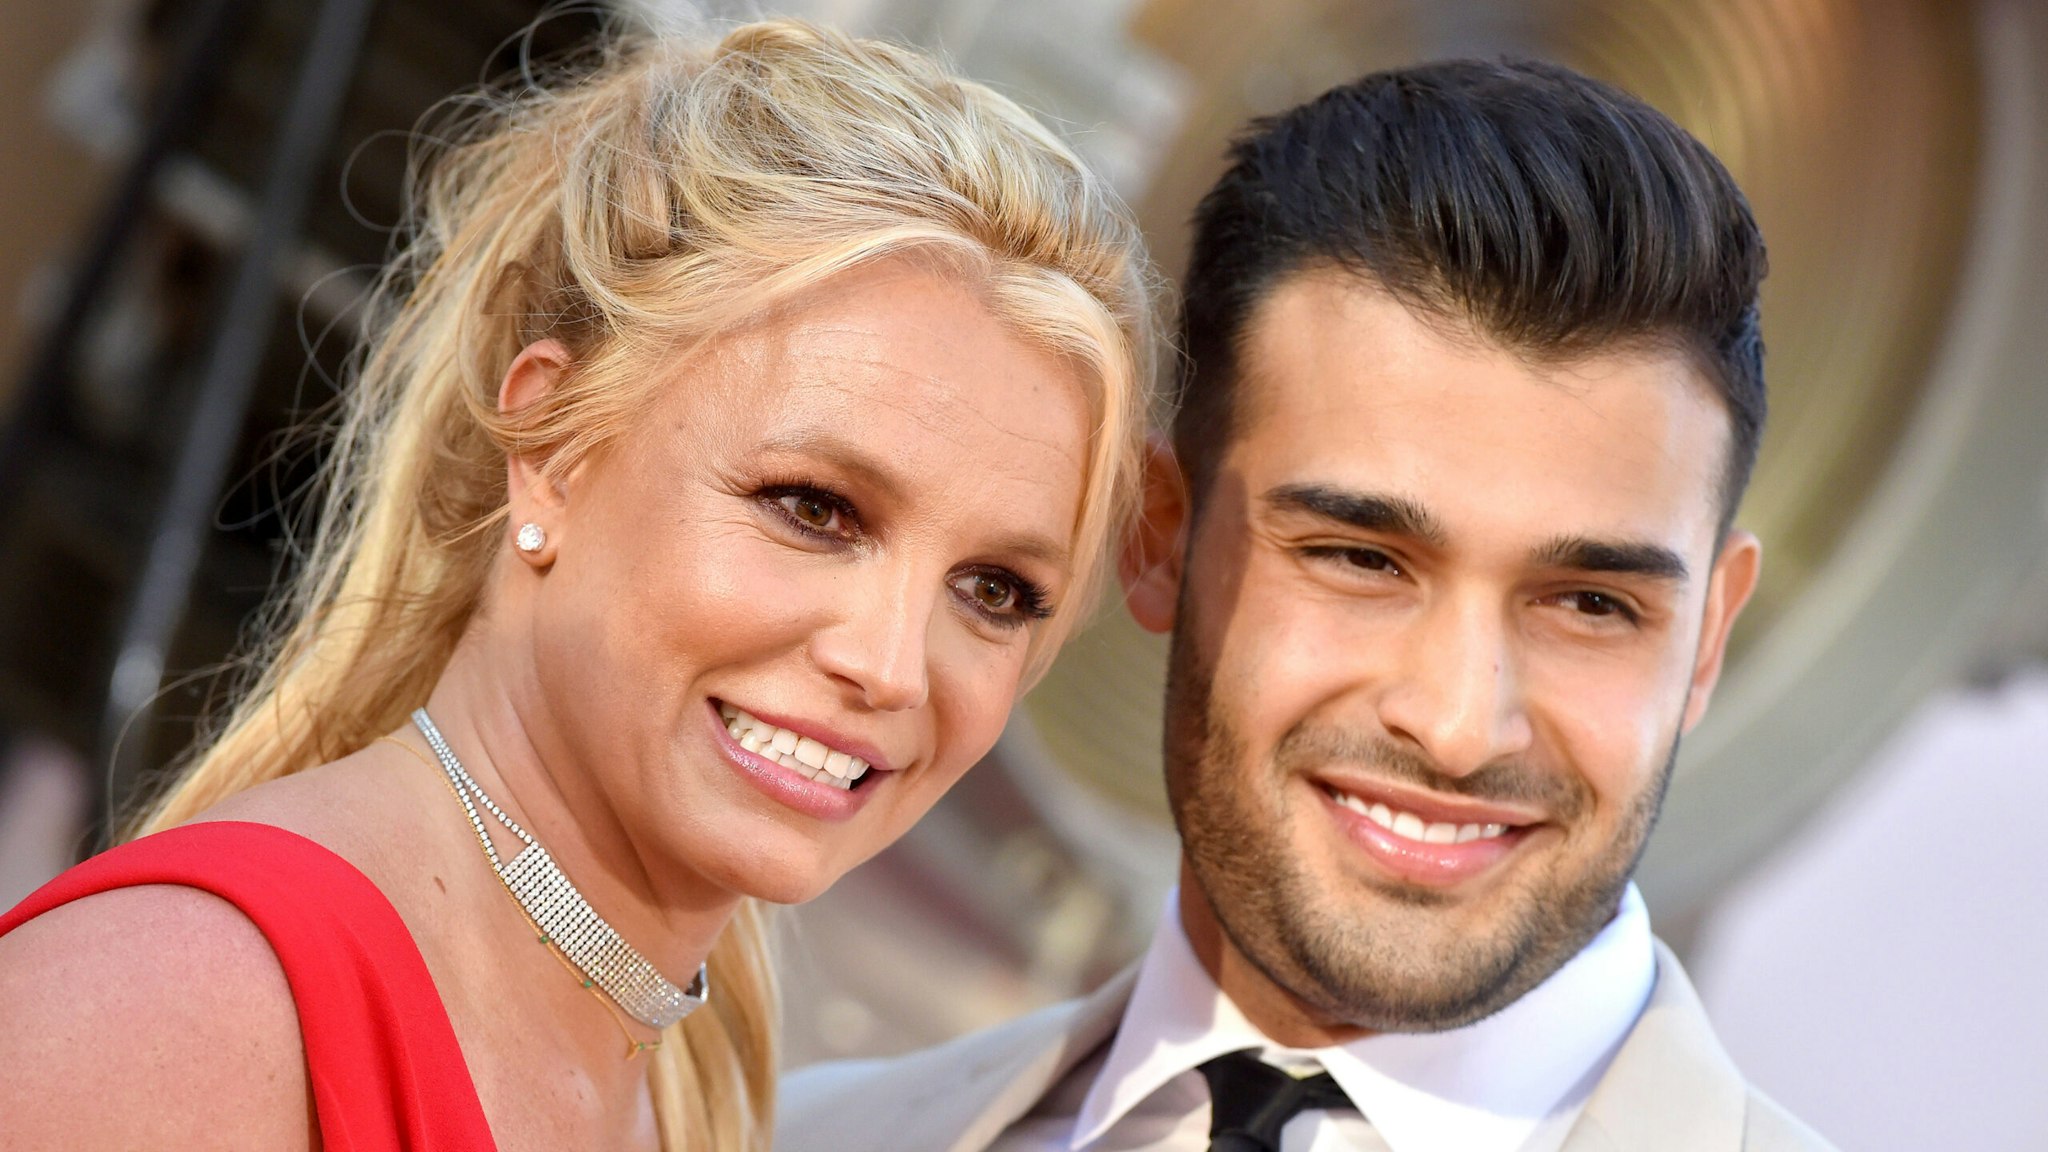 HOLLYWOOD, CALIFORNIA - JULY 22: Britney Spears and Sam Asghari attend Sony Pictures' "Once Upon a Time ... in Hollywood" Los Angeles Premiere on July 22, 2019 in Hollywood, California.